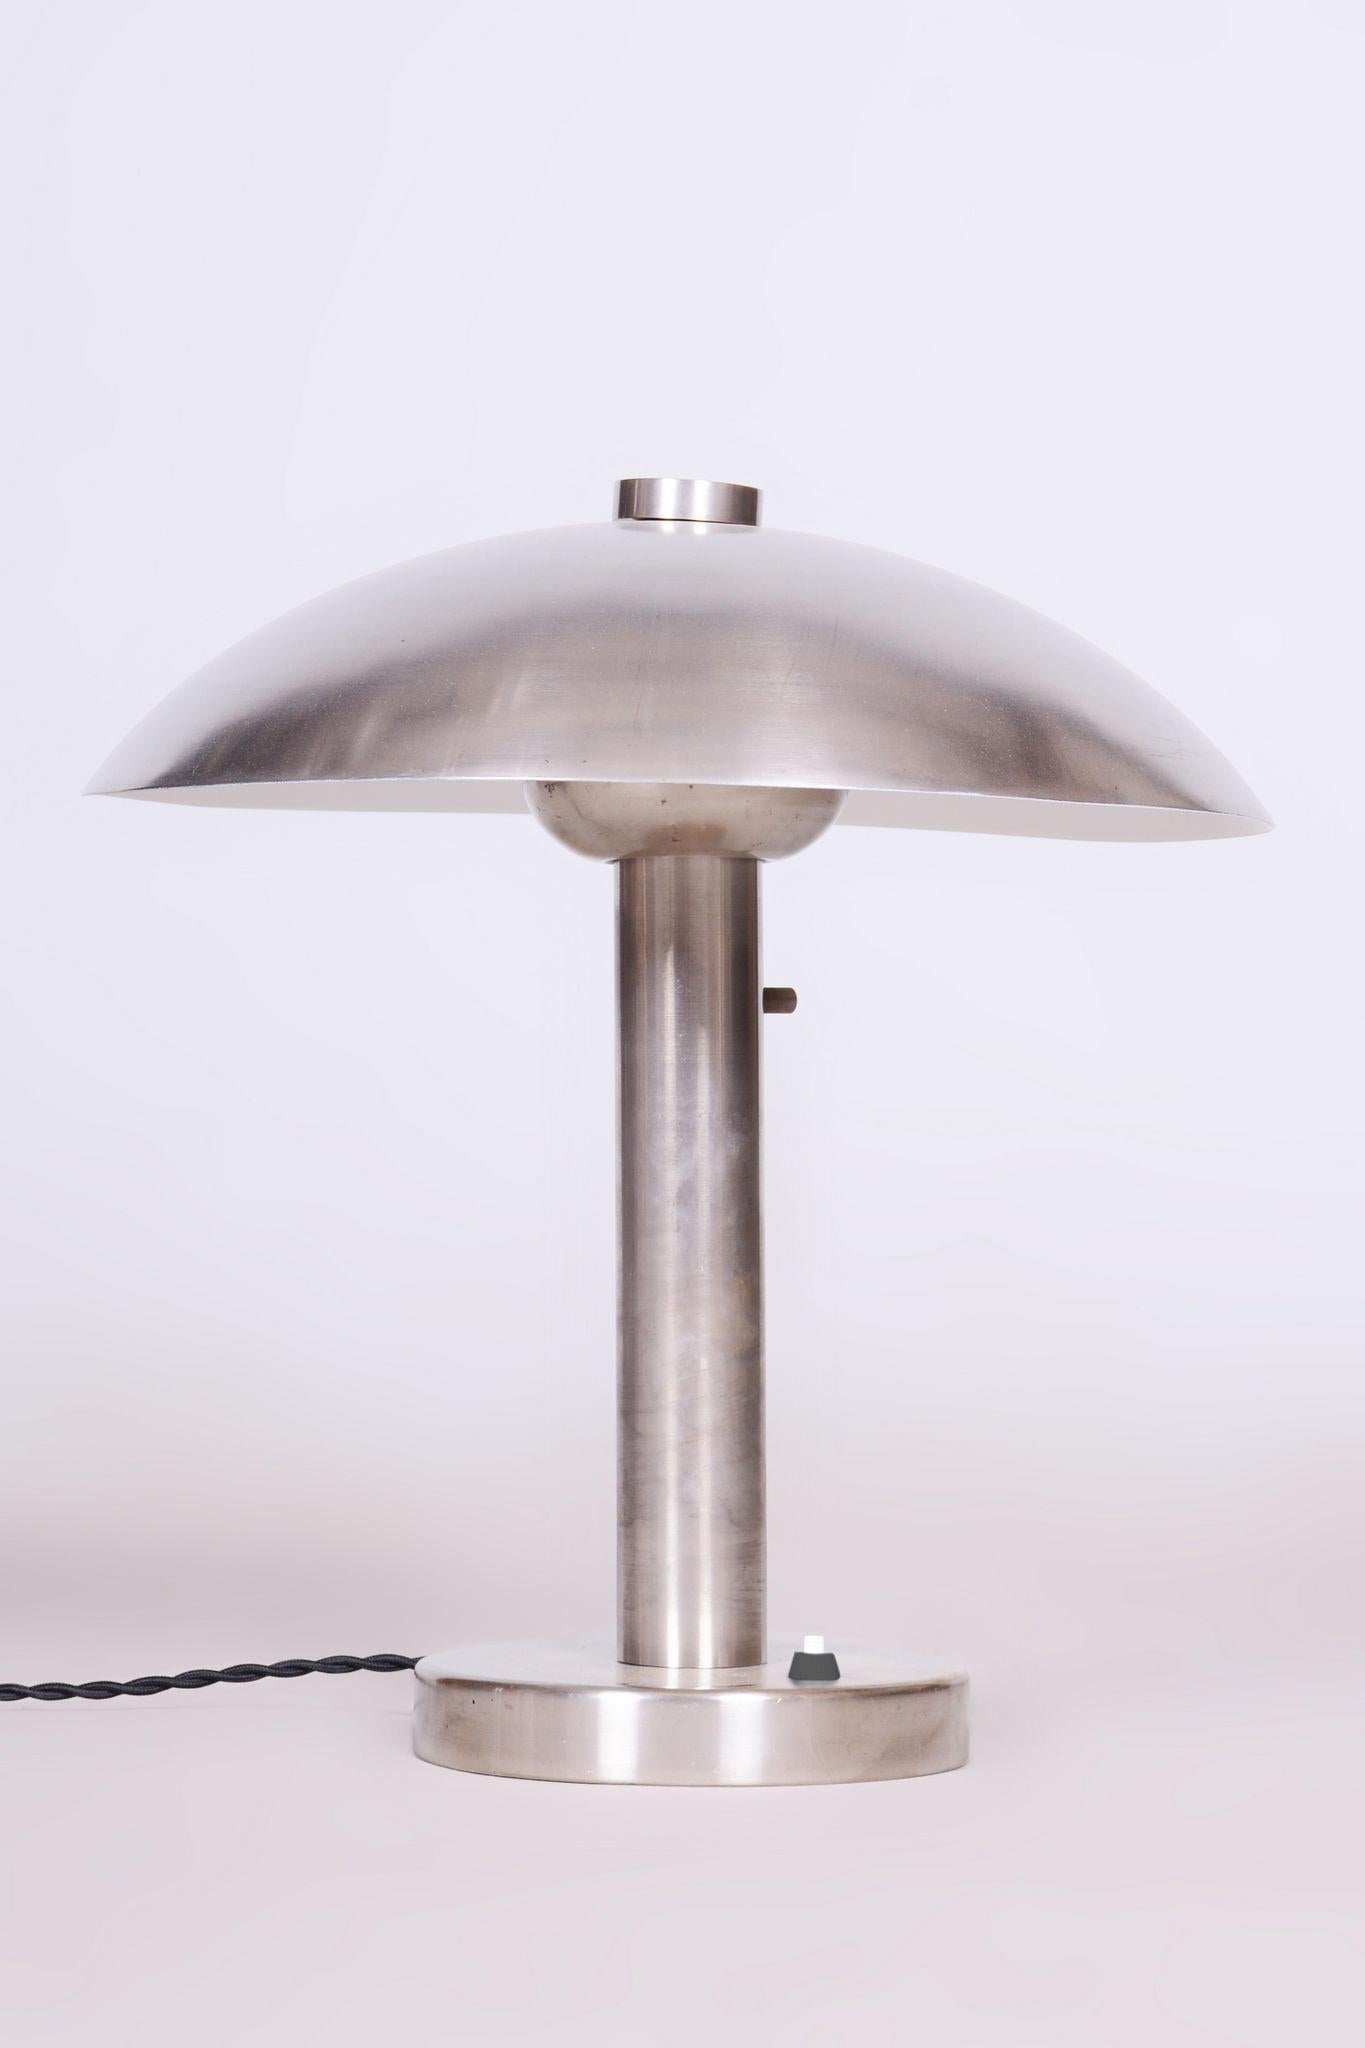 Restored table lamp 

Origin: Czech
Period: 1920-1929
Material: Nickel-plated steel

Uniquely designed adjustable light intensity by moving the bulb.

This item has new fully functioning electrification. 

Our professional refurbishing team in